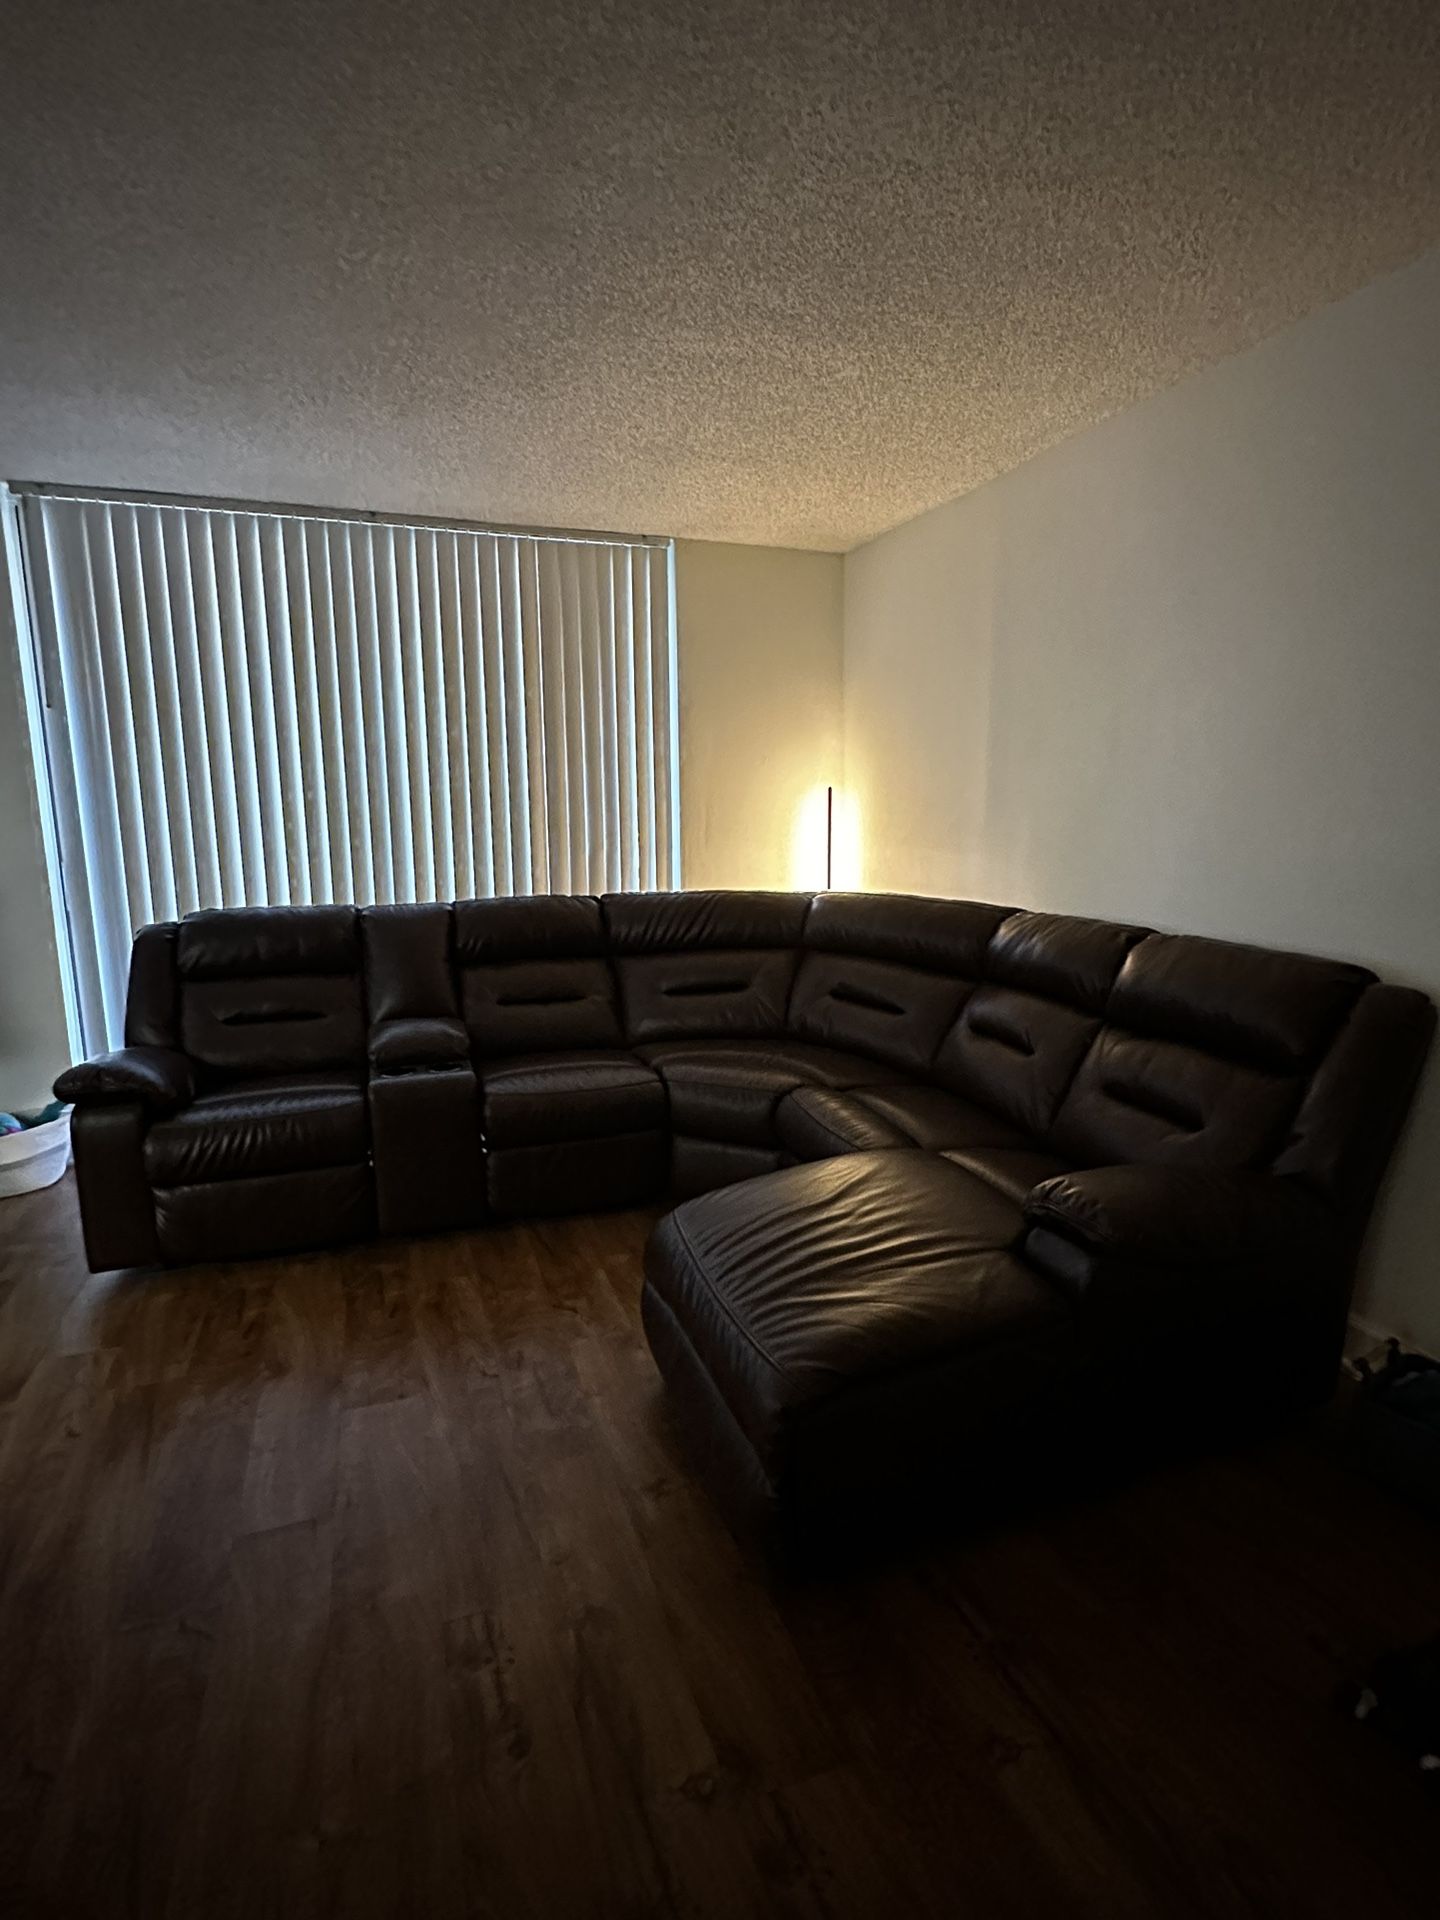 Leather Couch For Sale